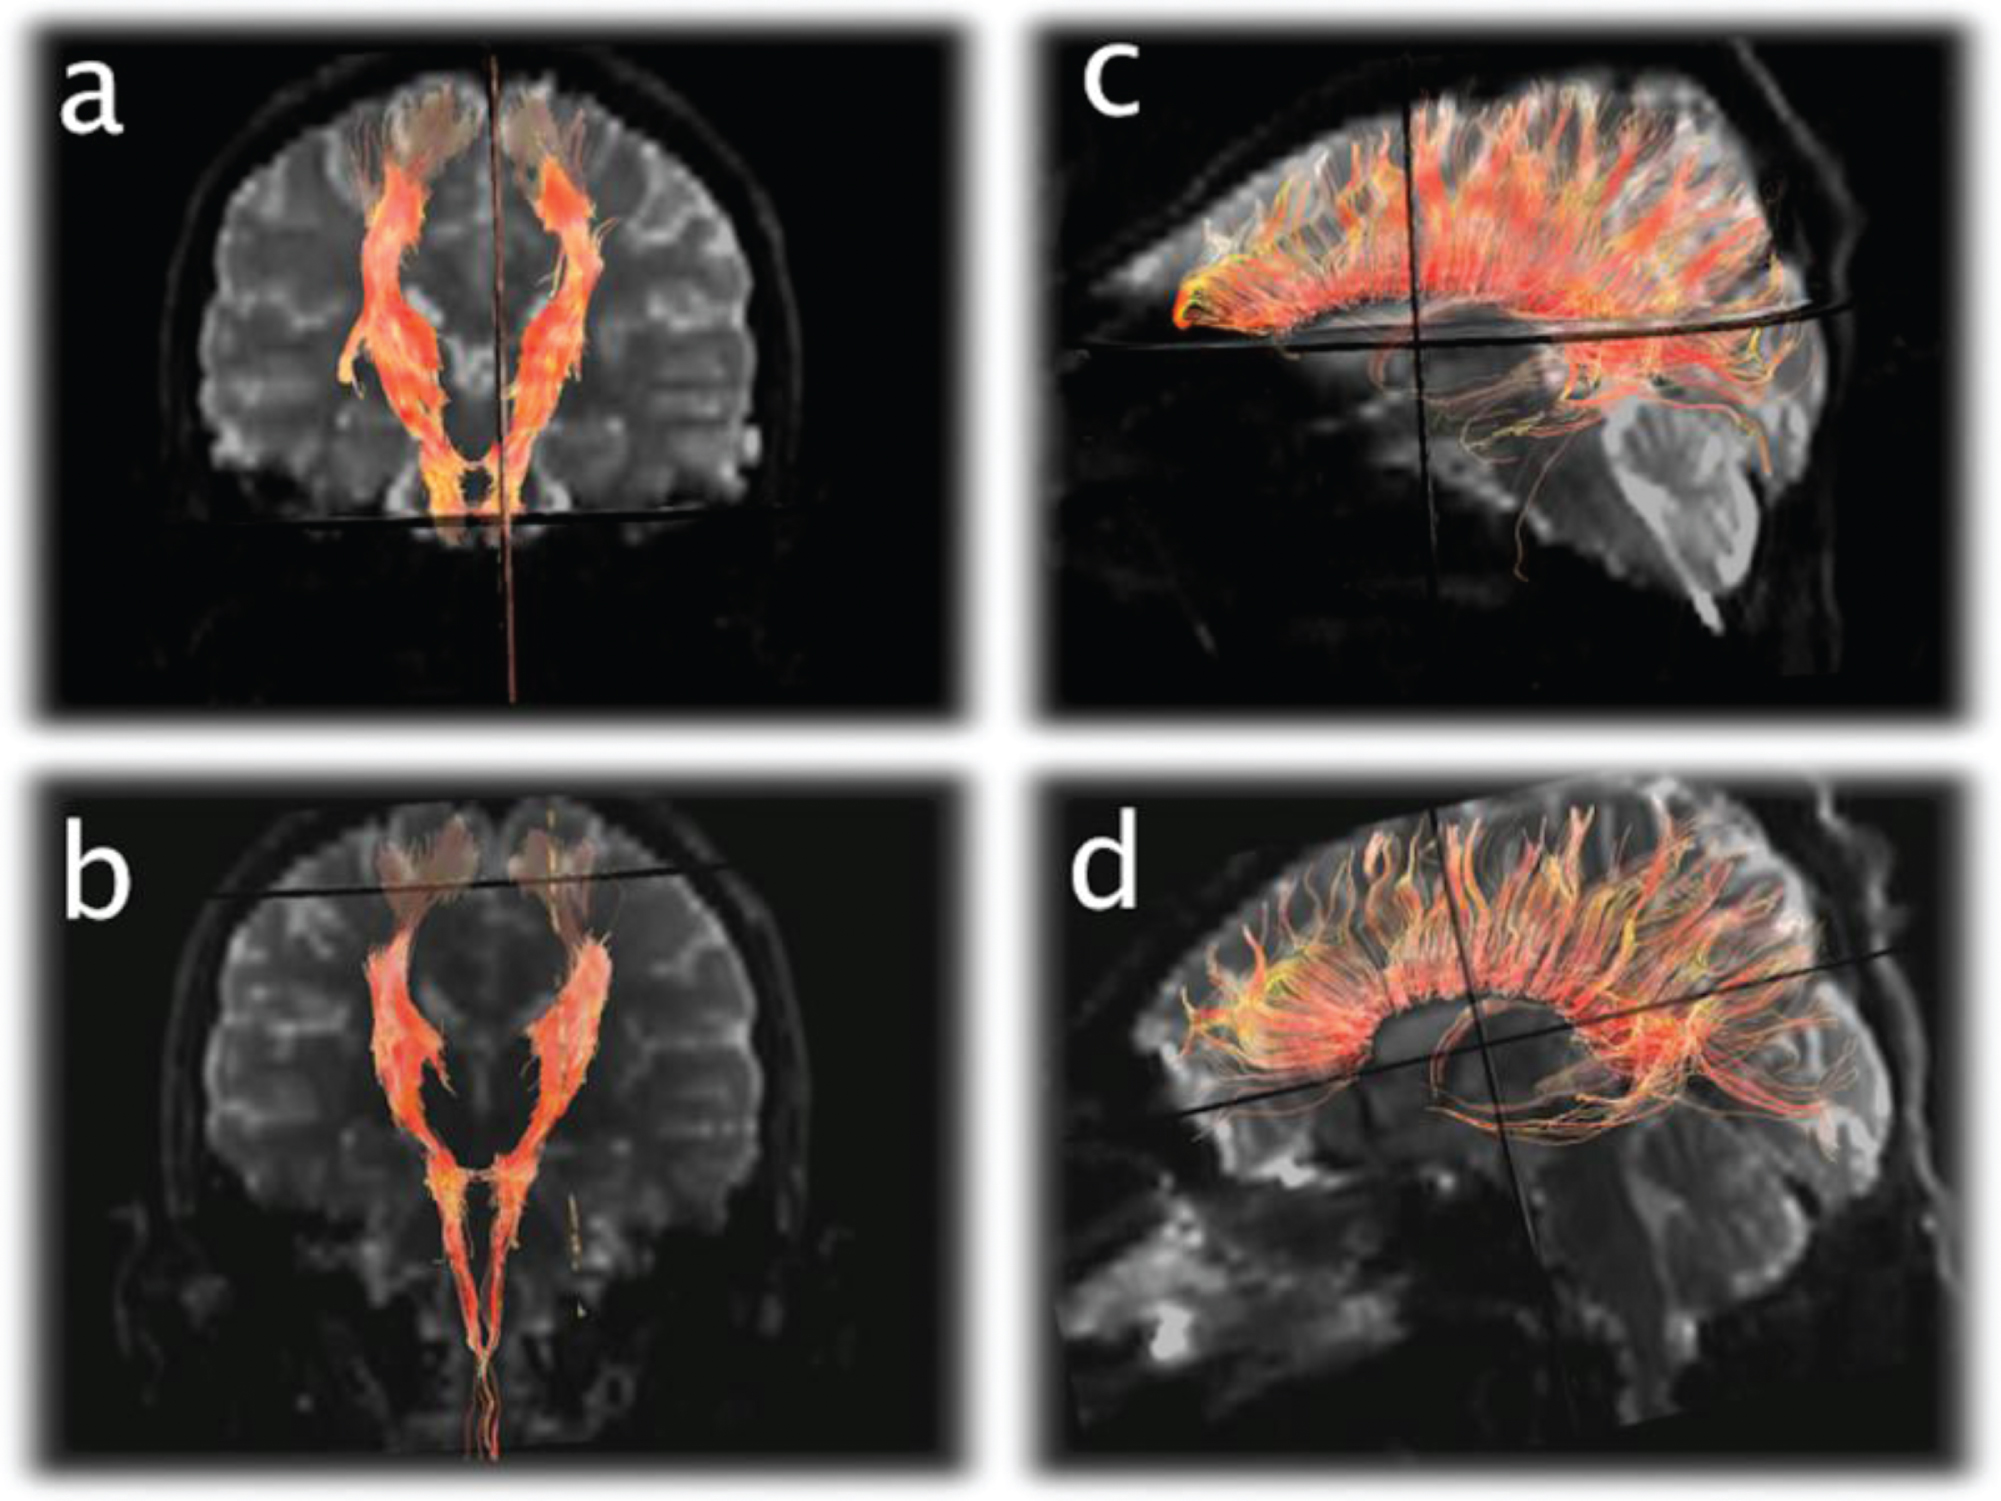 Diffusion Tensor Imaging (DTI) tractography of the corticospinal tracts displayed in the anterioroposterior plane (a and b) and corpus callosum displayed laterally (c and d) from the 1st exam (a and c) and final exam (b and d) demonstrating subtle diminution of the number of projectional and commissural fibers over time.